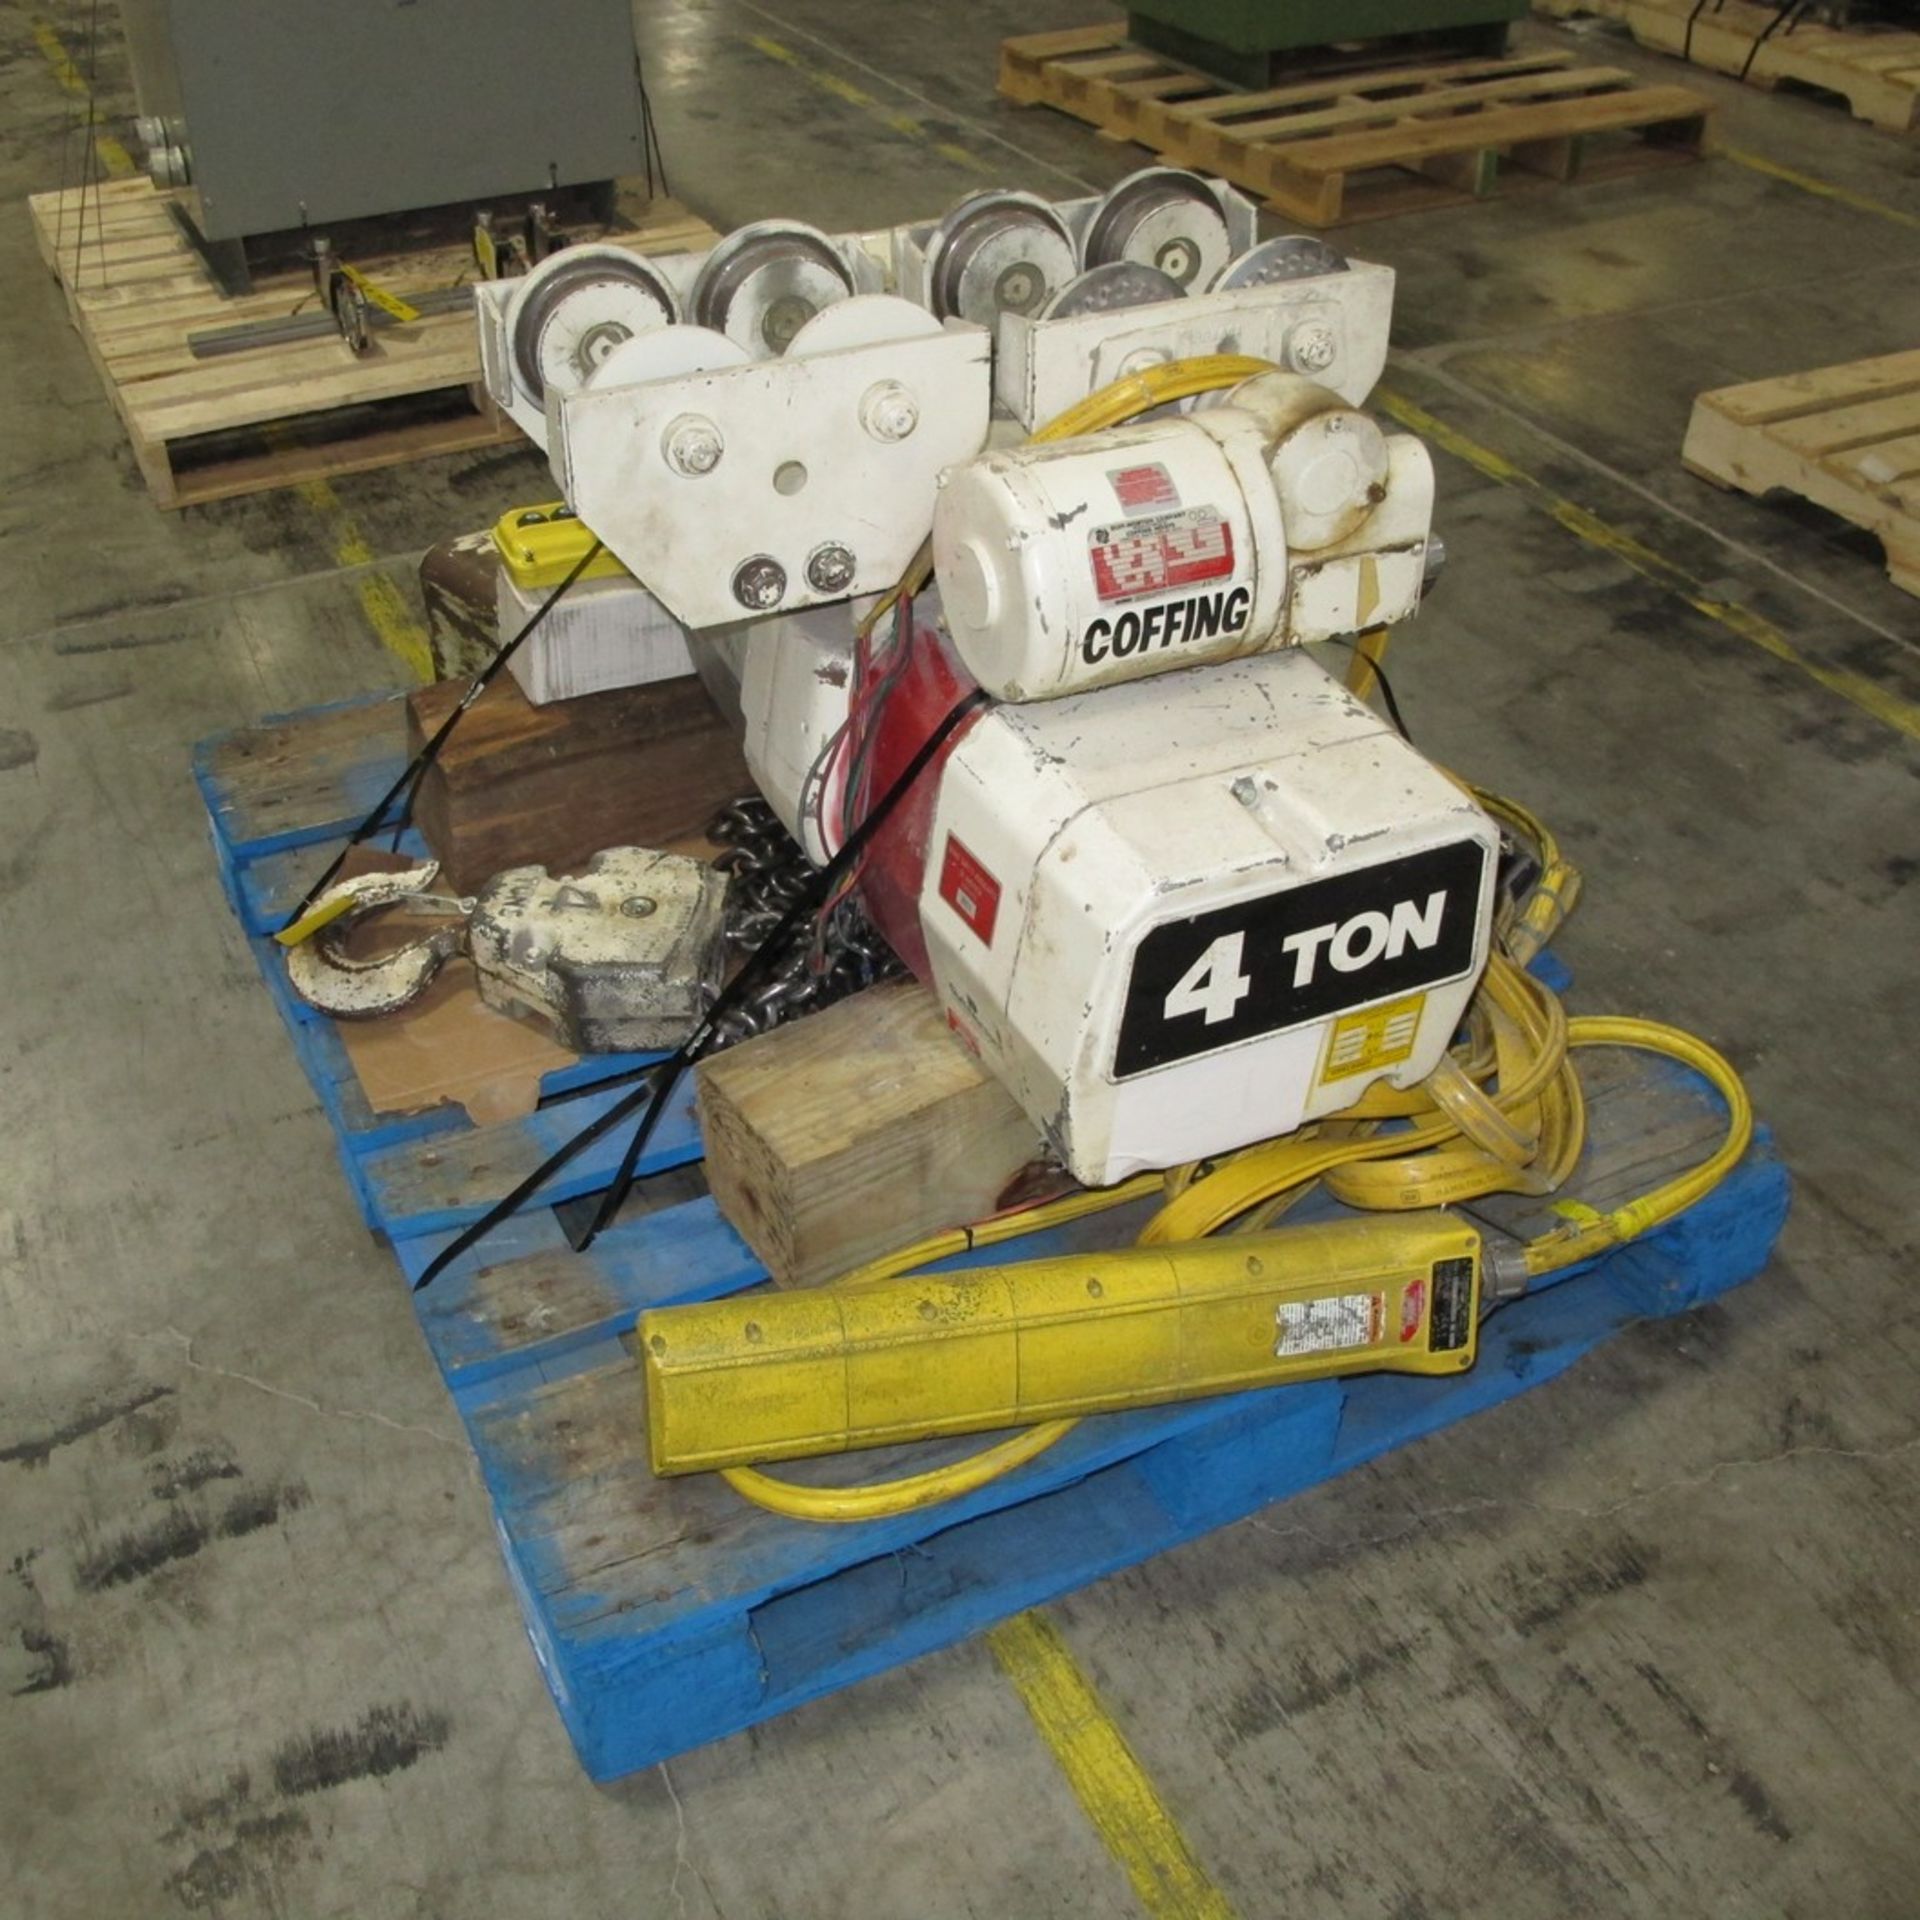 COFFING 4-TON CAP. CRANE/TROLLY W/ PENDANT CONTROL AND SPACE PENDANT CONTROLLER (WEST CENTER PLANT) - Image 2 of 2